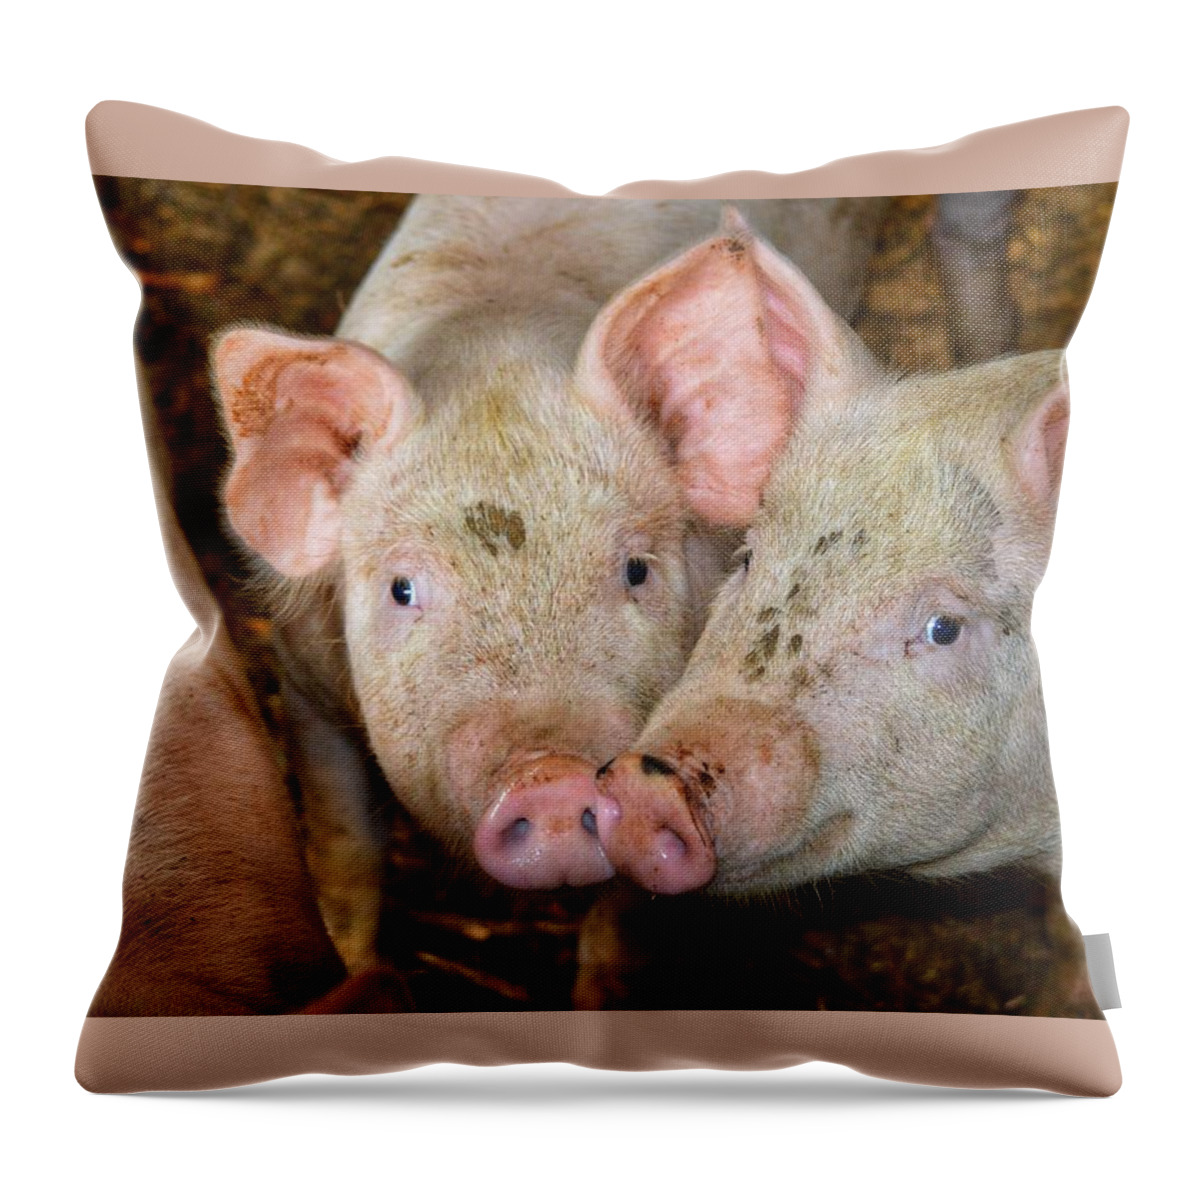 Pig Throw Pillow featuring the photograph Two Pigs by Joseph Caban